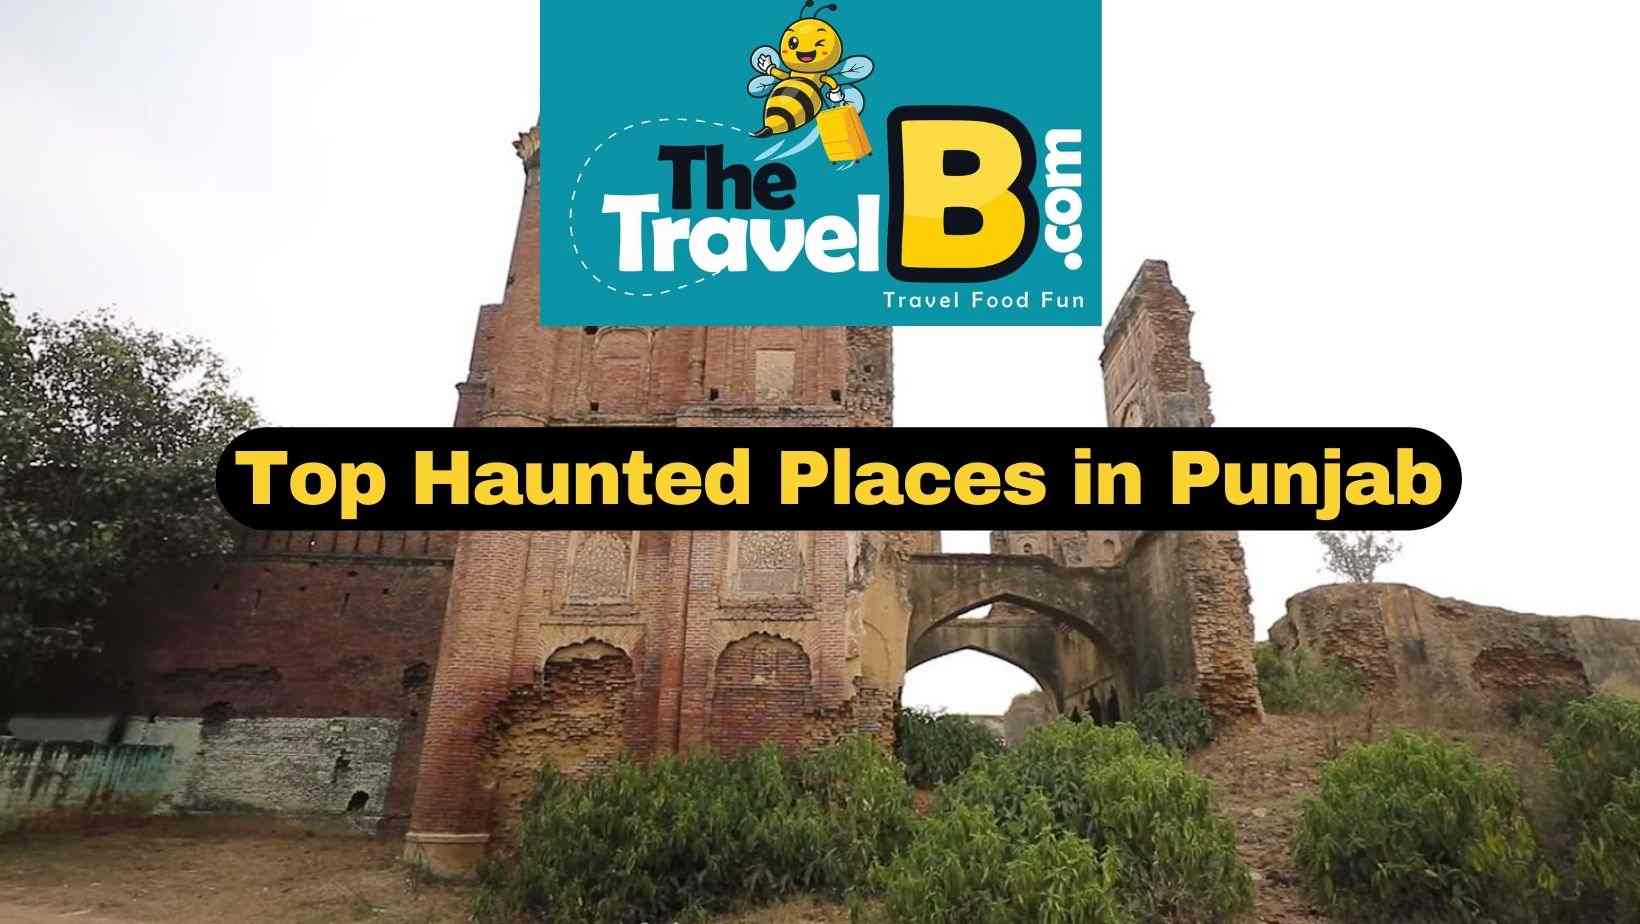 Top Haunted Places in Punjab